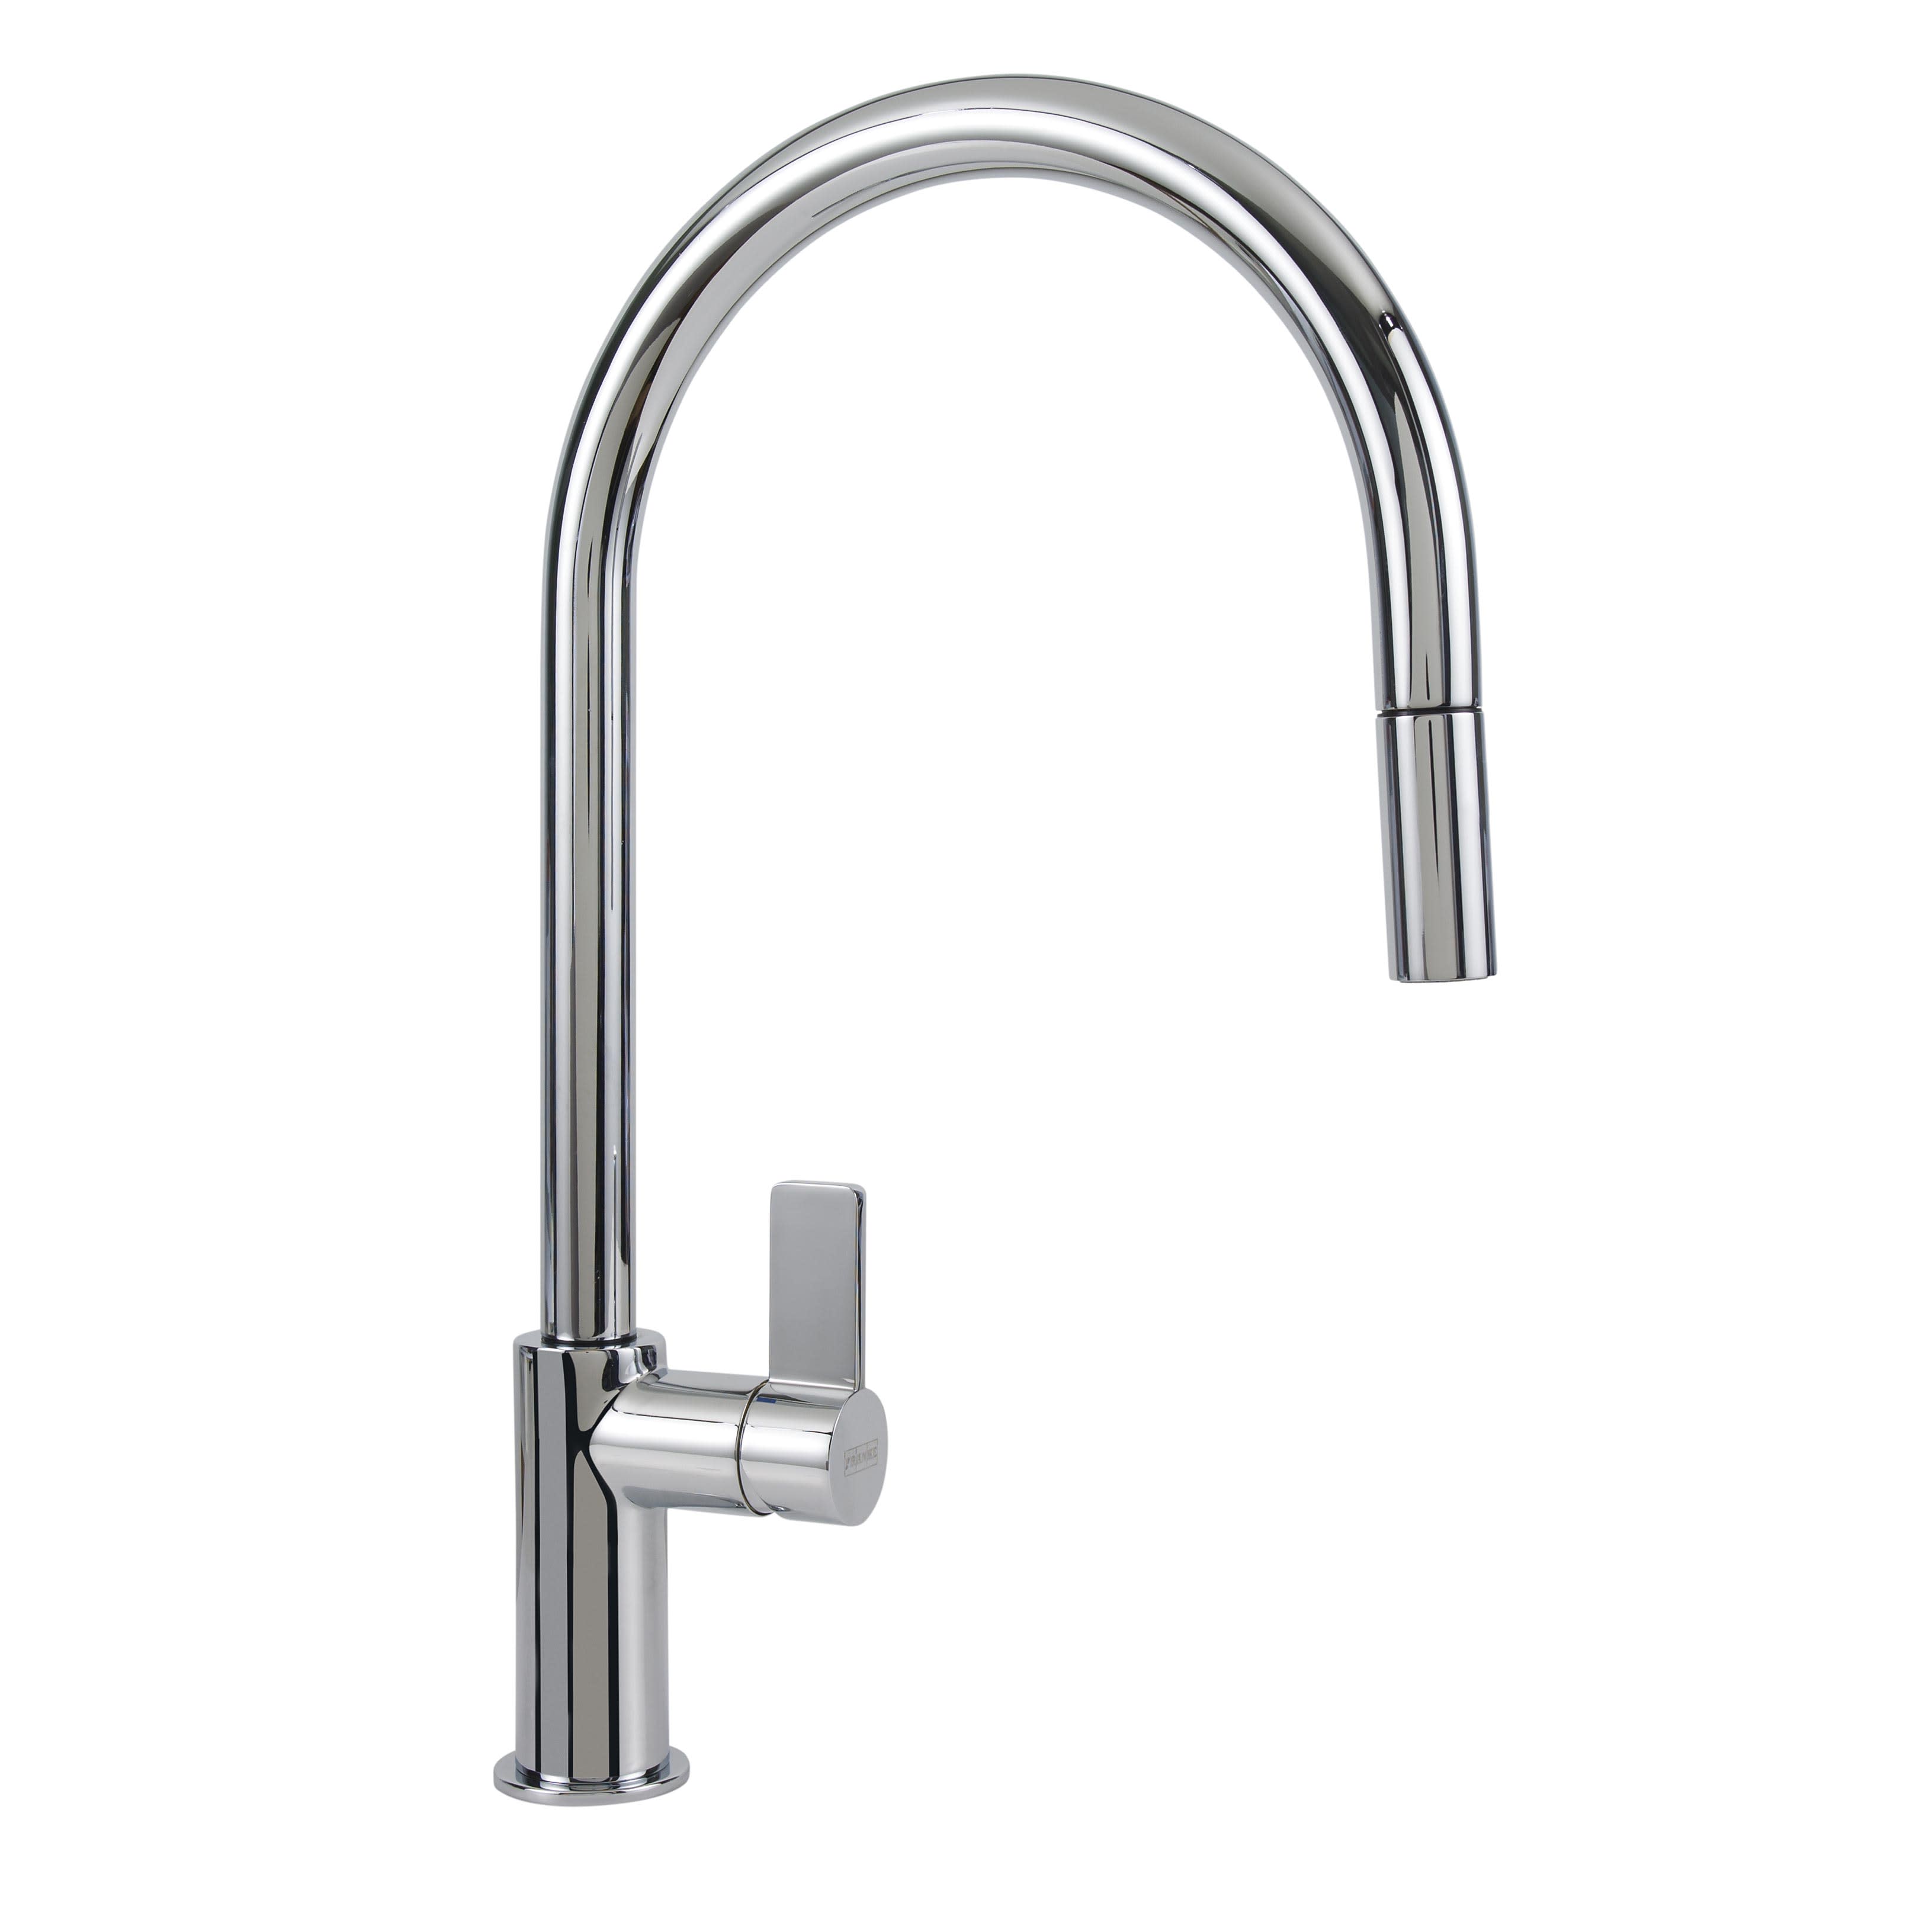 Franke Ff3100 Ambient Pull Down Faucet Qualitybath Com